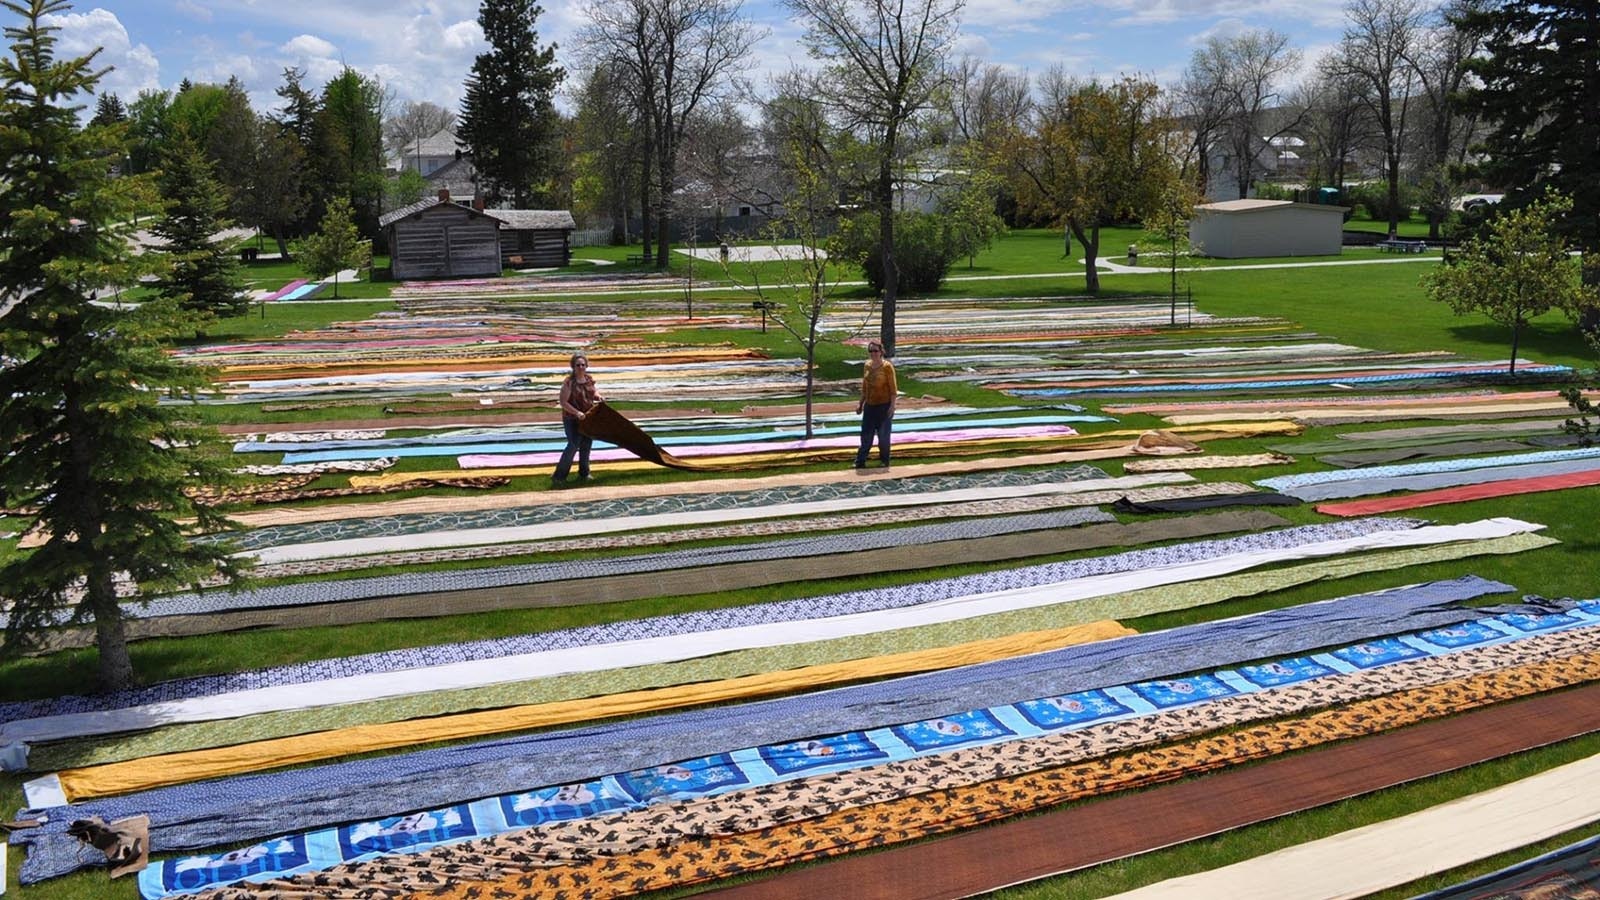 This photo helped spark the Wyoming Quilt Trail, which began after all this fabric was put out to dry after a devastating flood in 2015.